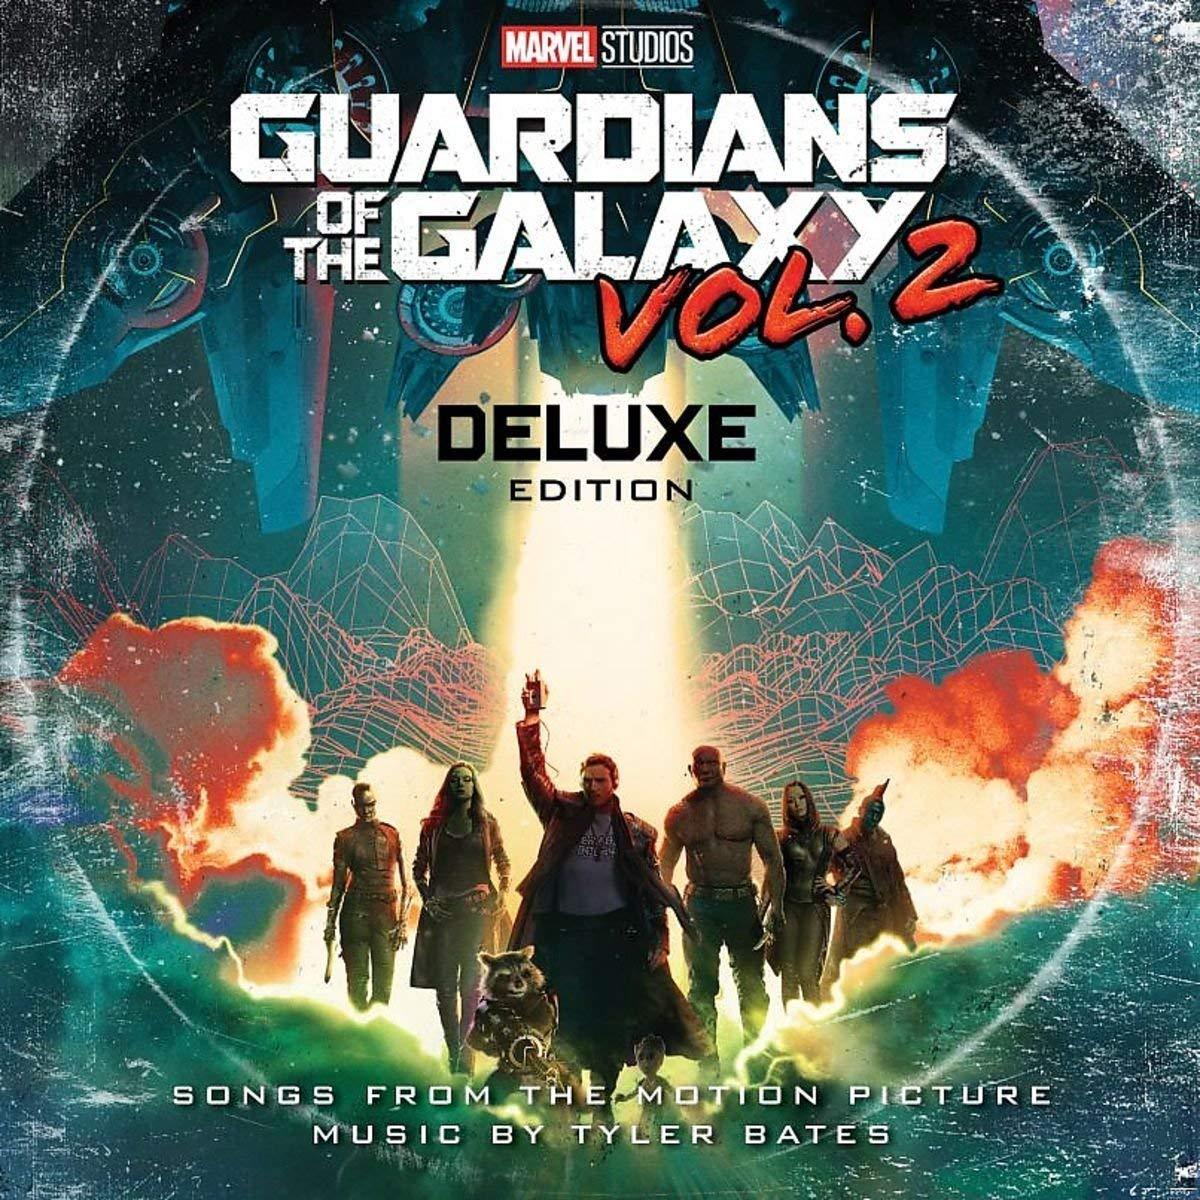 Guardians Of The Galaxy, Awesome Mix Vol. 2 (Songs From the Motion Picture) (Deluxe Edition) (2 LP) - Joco Records